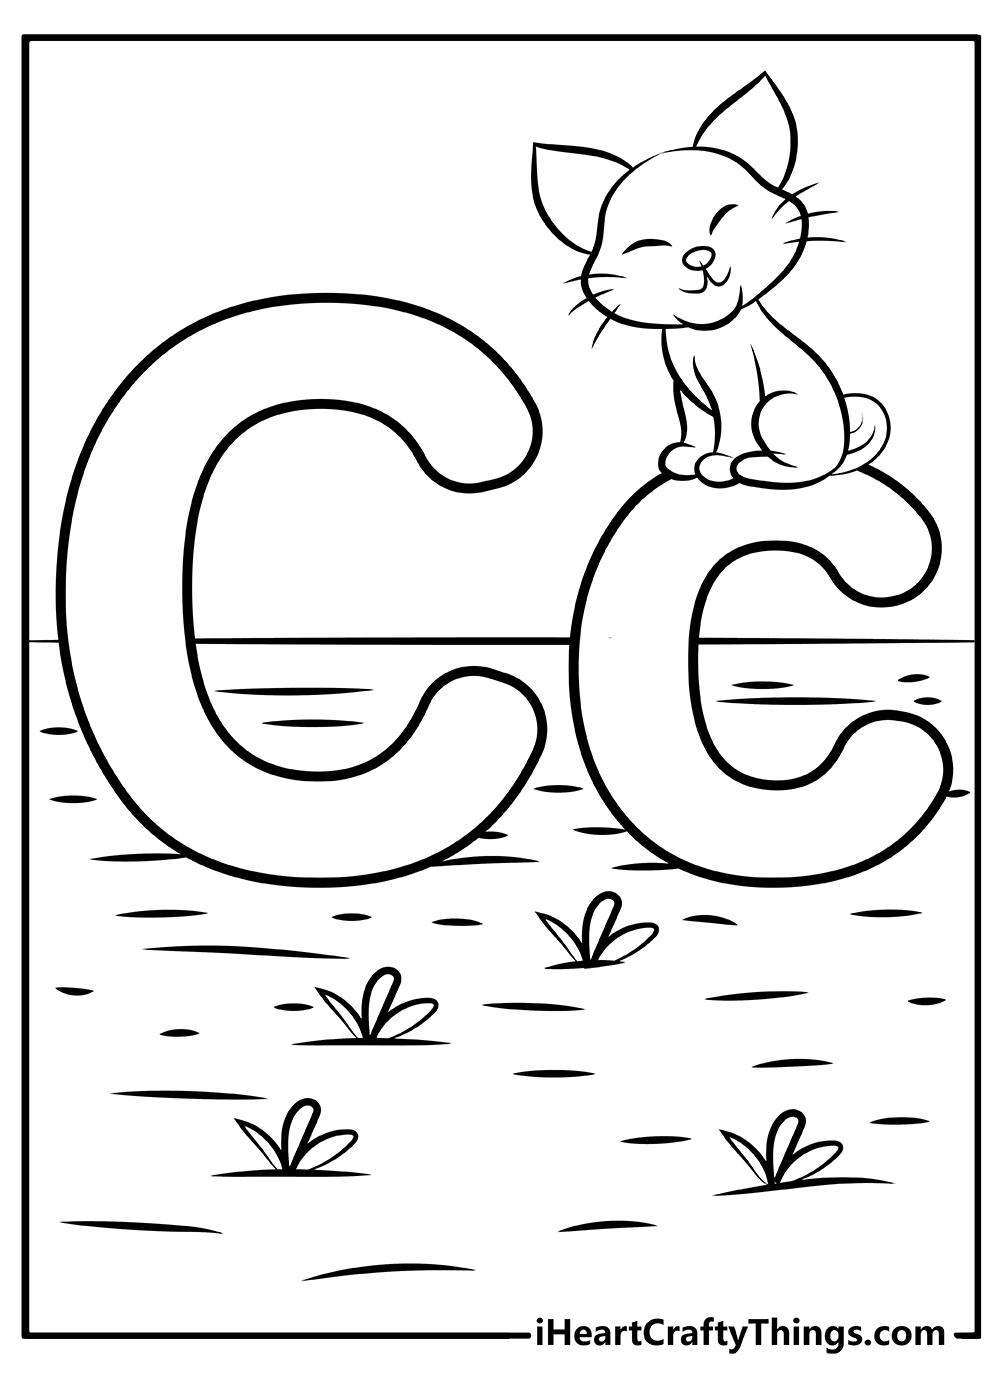 Alphabet Coloring Pages letter C free printable